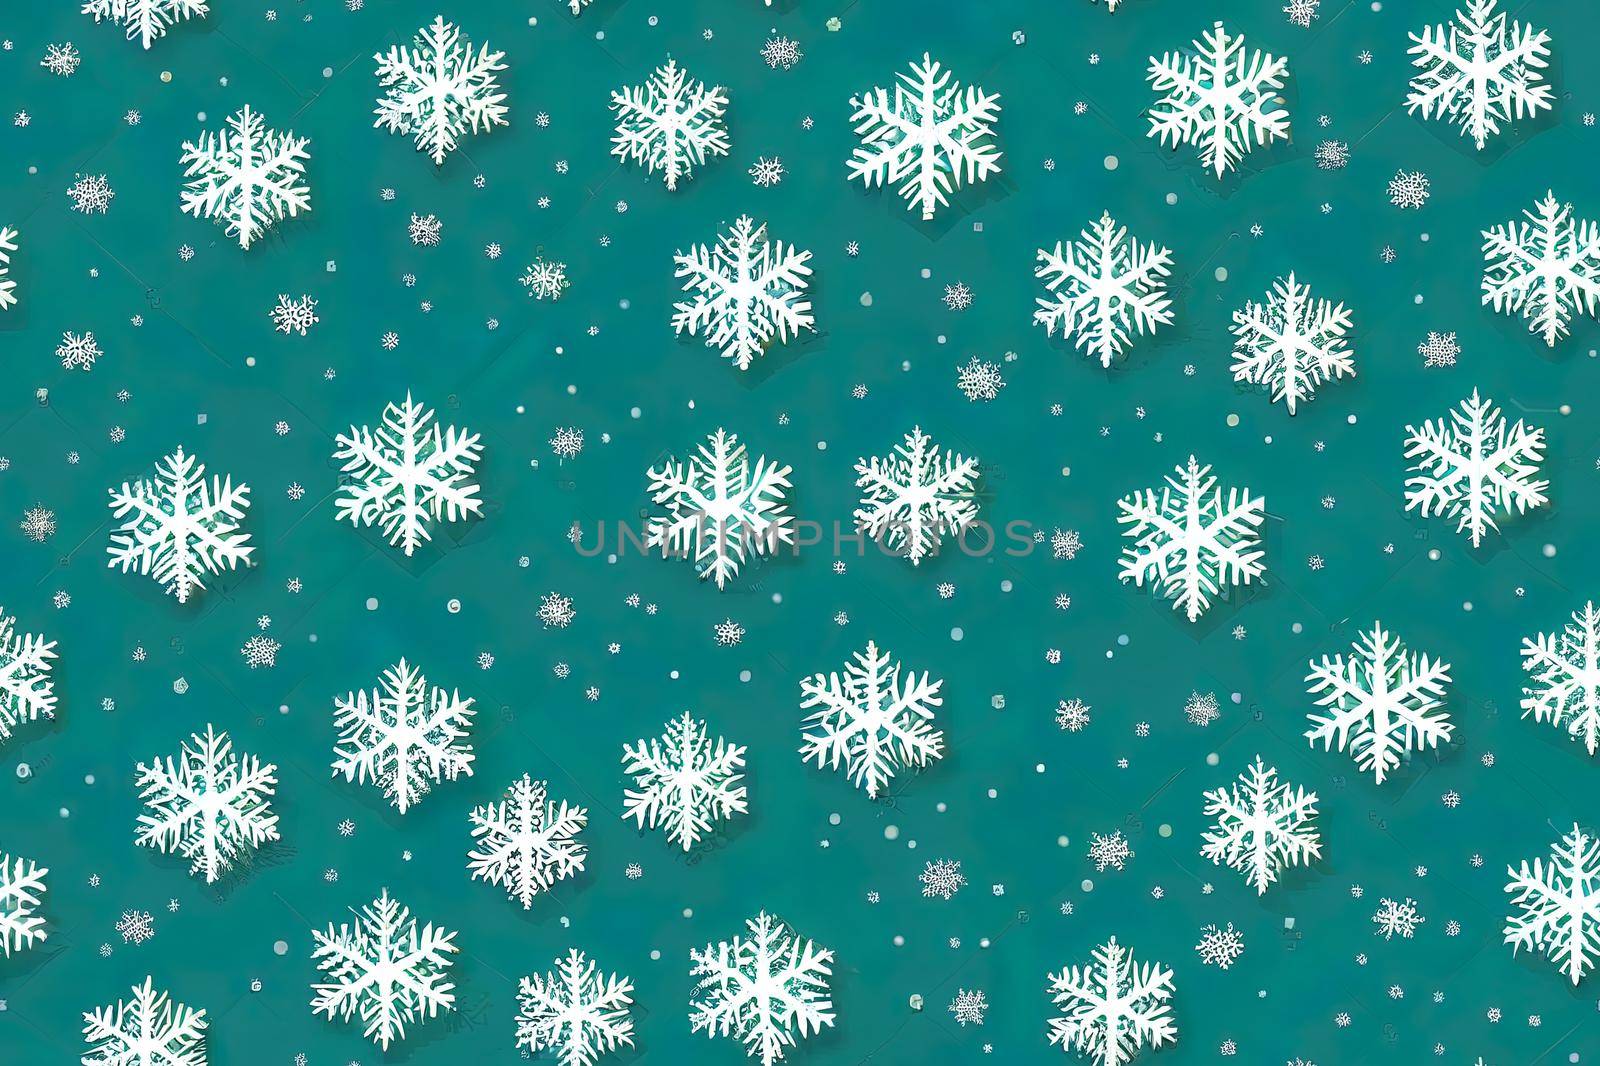 Christmas background with snowflakes. Festive seamless pattern of white snowflakes on a light green background. High quality illustration